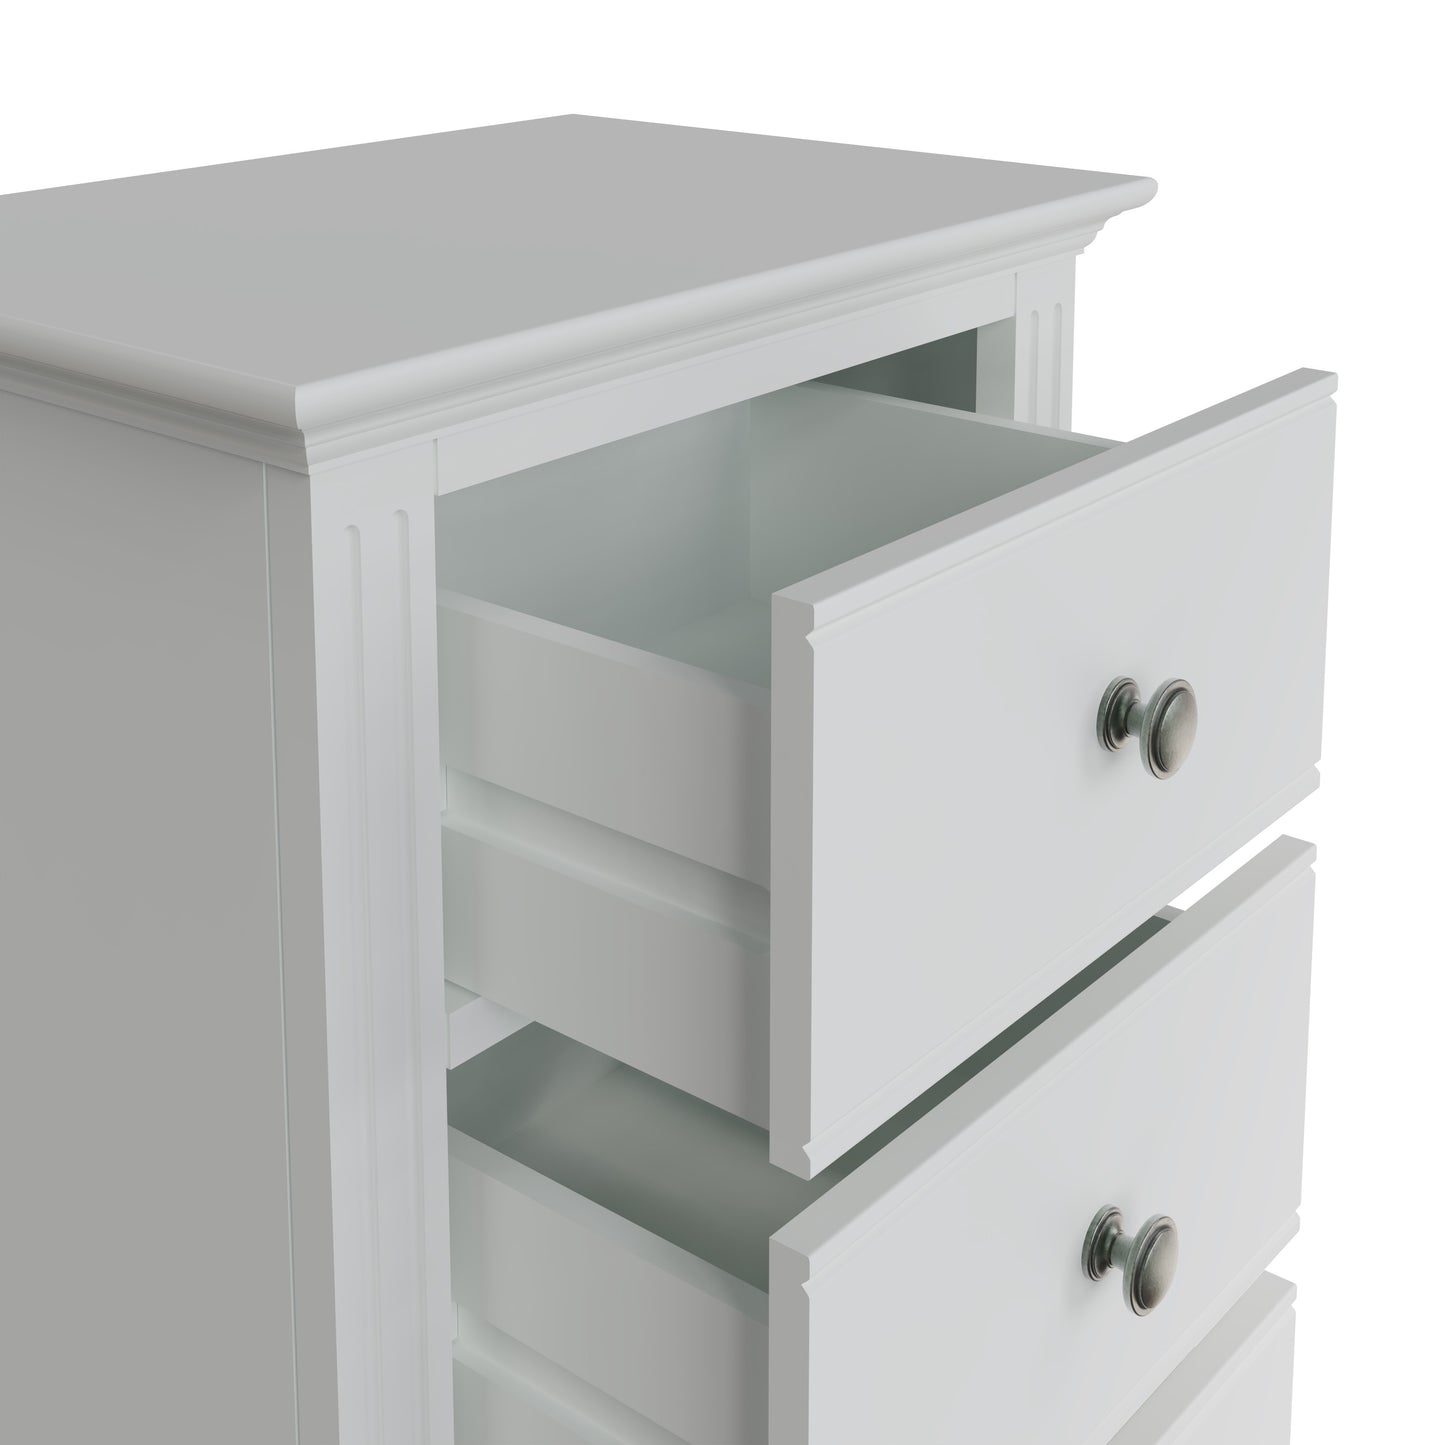 5 Drawer Narrow Chest of Drawers